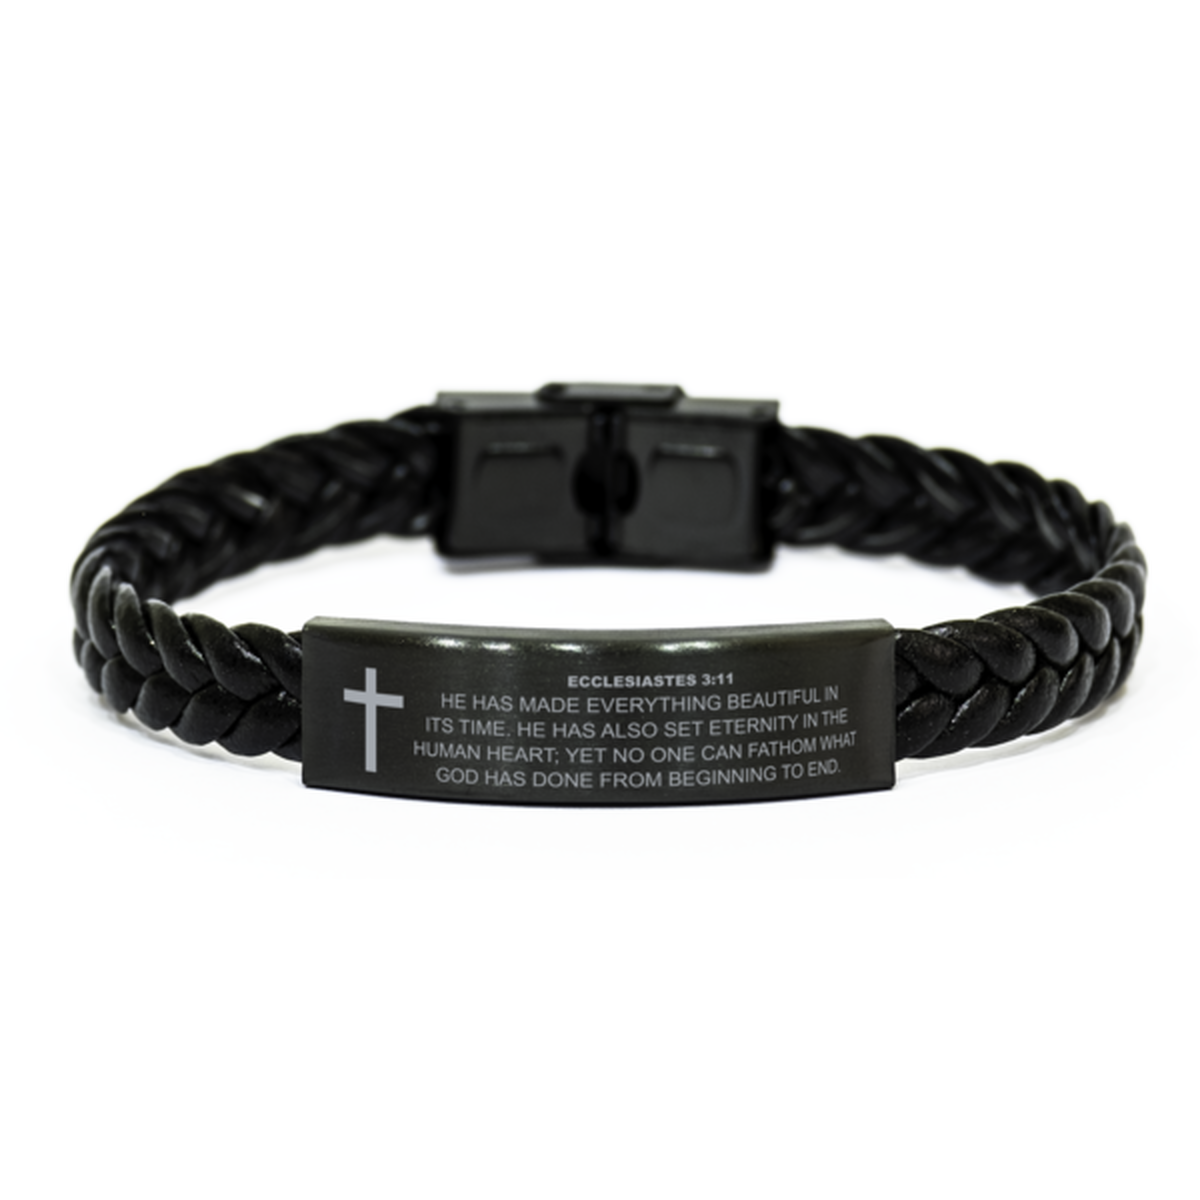 Ecclesiastes 3:11 Bracelet, He Has Made Everything Beautiful In Its Time, Bible Verse Bracelet, Christian Bracelet, Braided Leather Bracelet